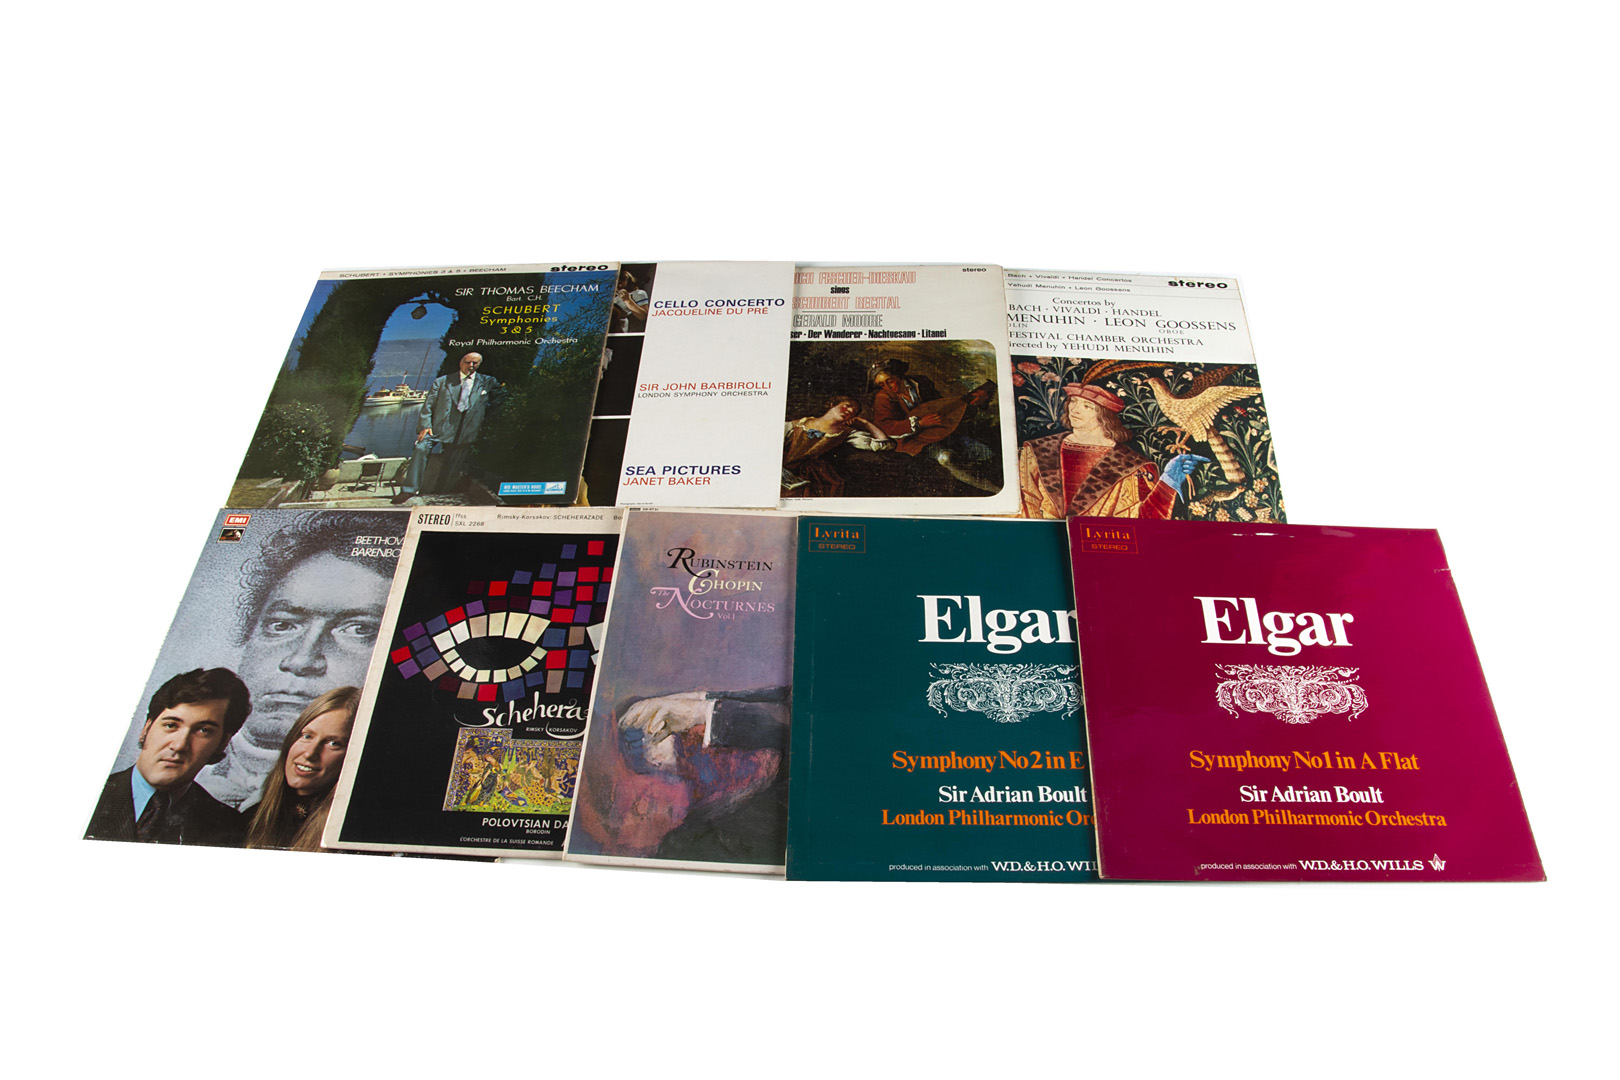 Stereo Classical LPs / Signatures, nine UK release stereo album on HMV, Decca, RCA and Lyrita with